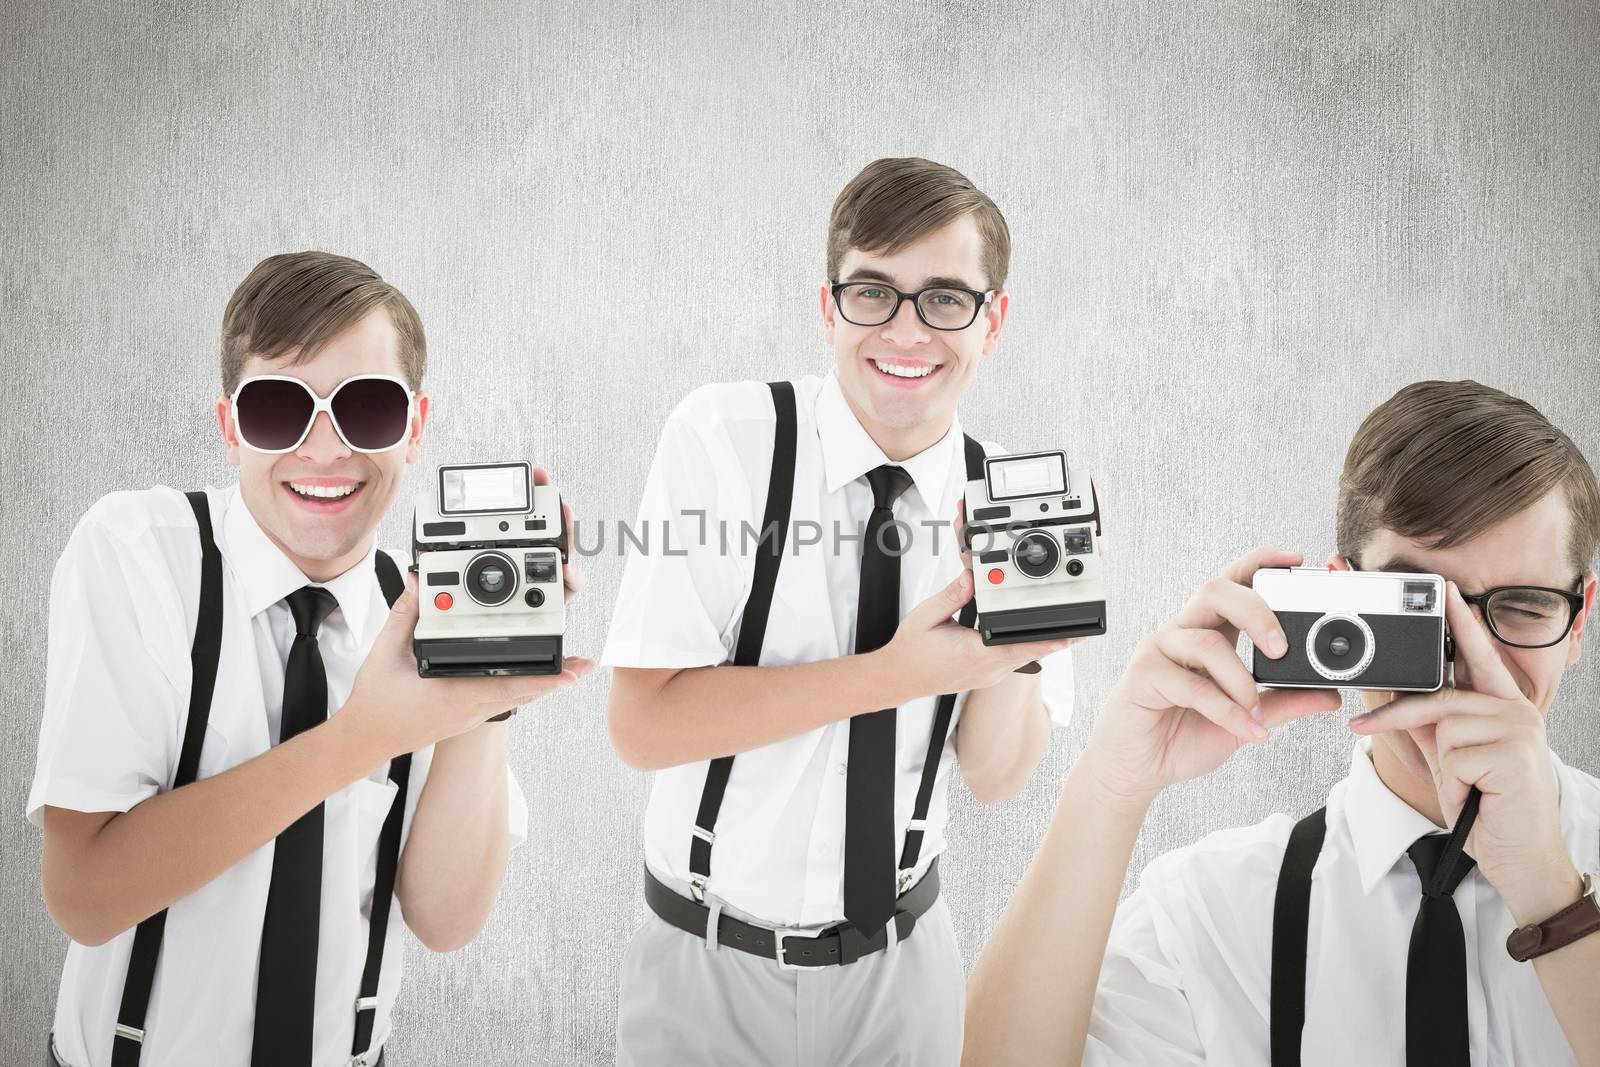 Geek with camera against white and grey background